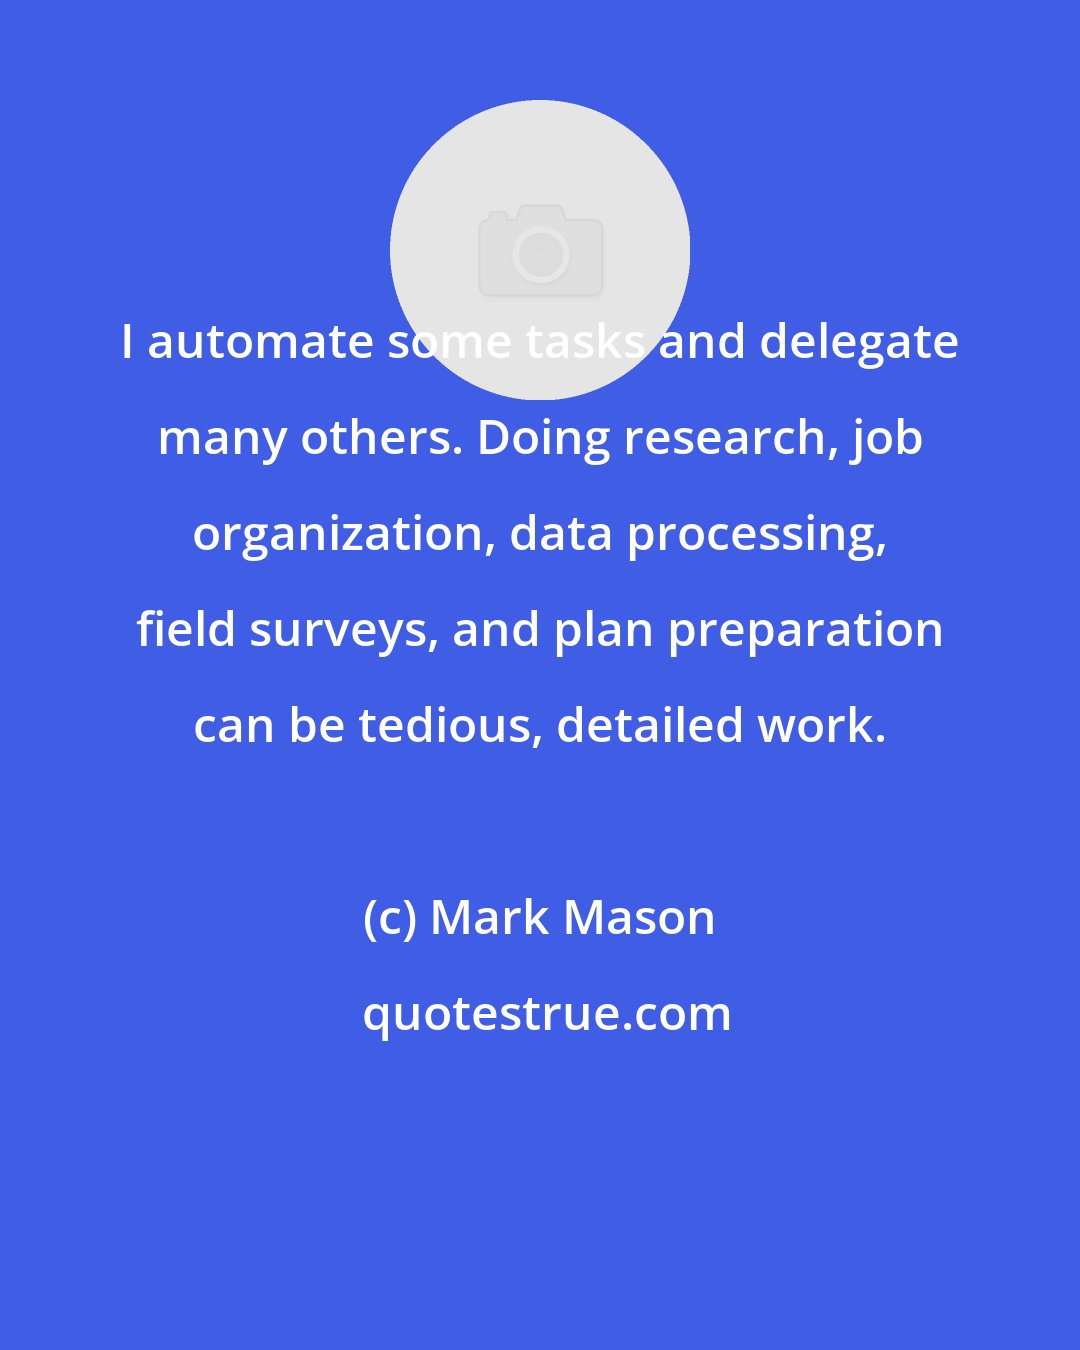 Mark Mason: I automate some tasks and delegate many others. Doing research, job organization, data processing, field surveys, and plan preparation can be tedious, detailed work.